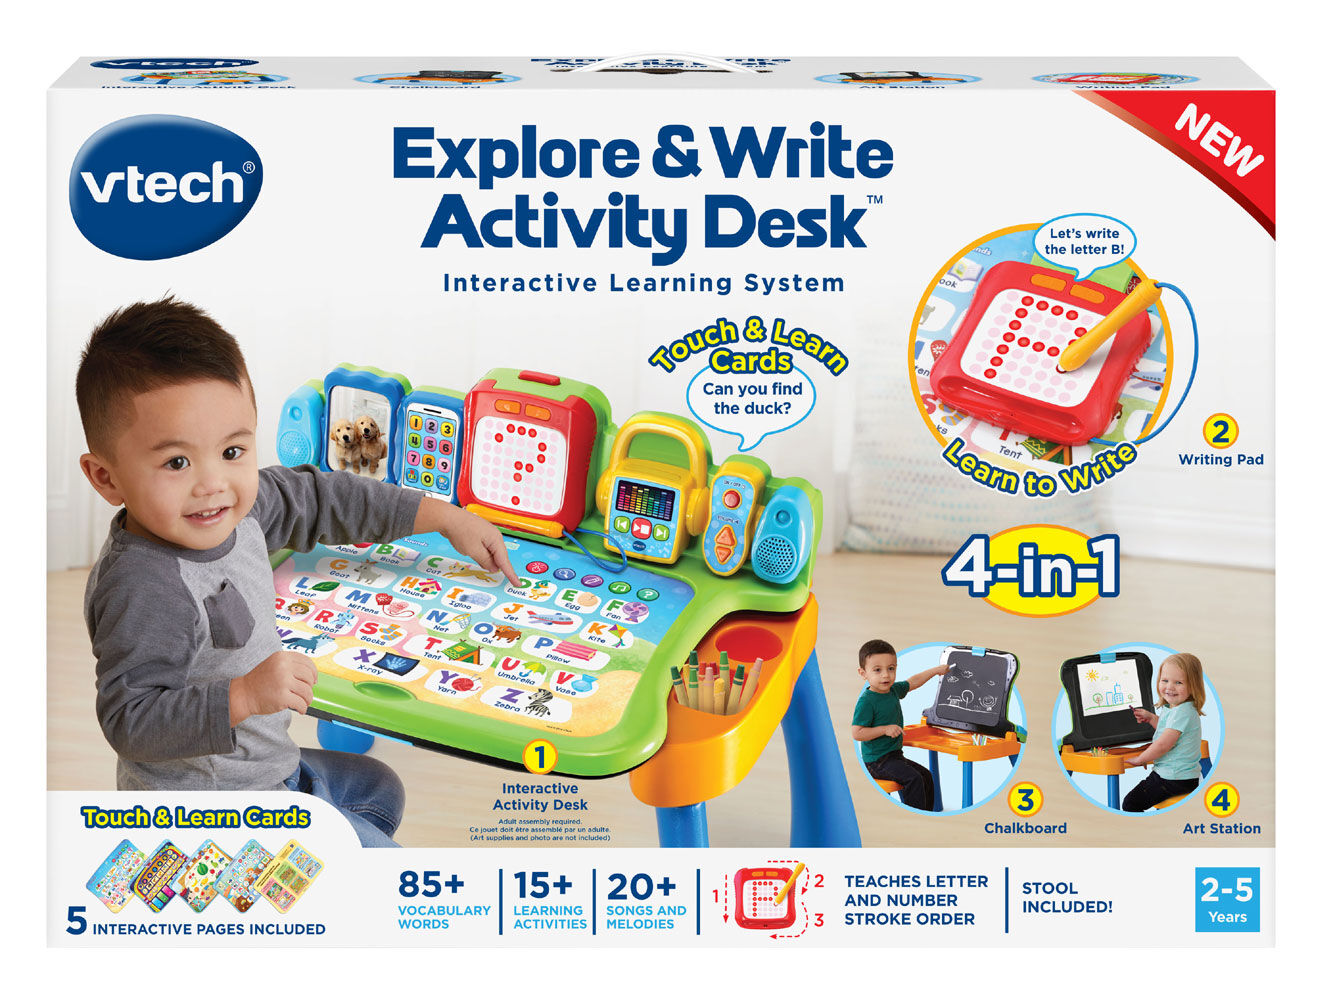 vtech 3 in 1 activity table